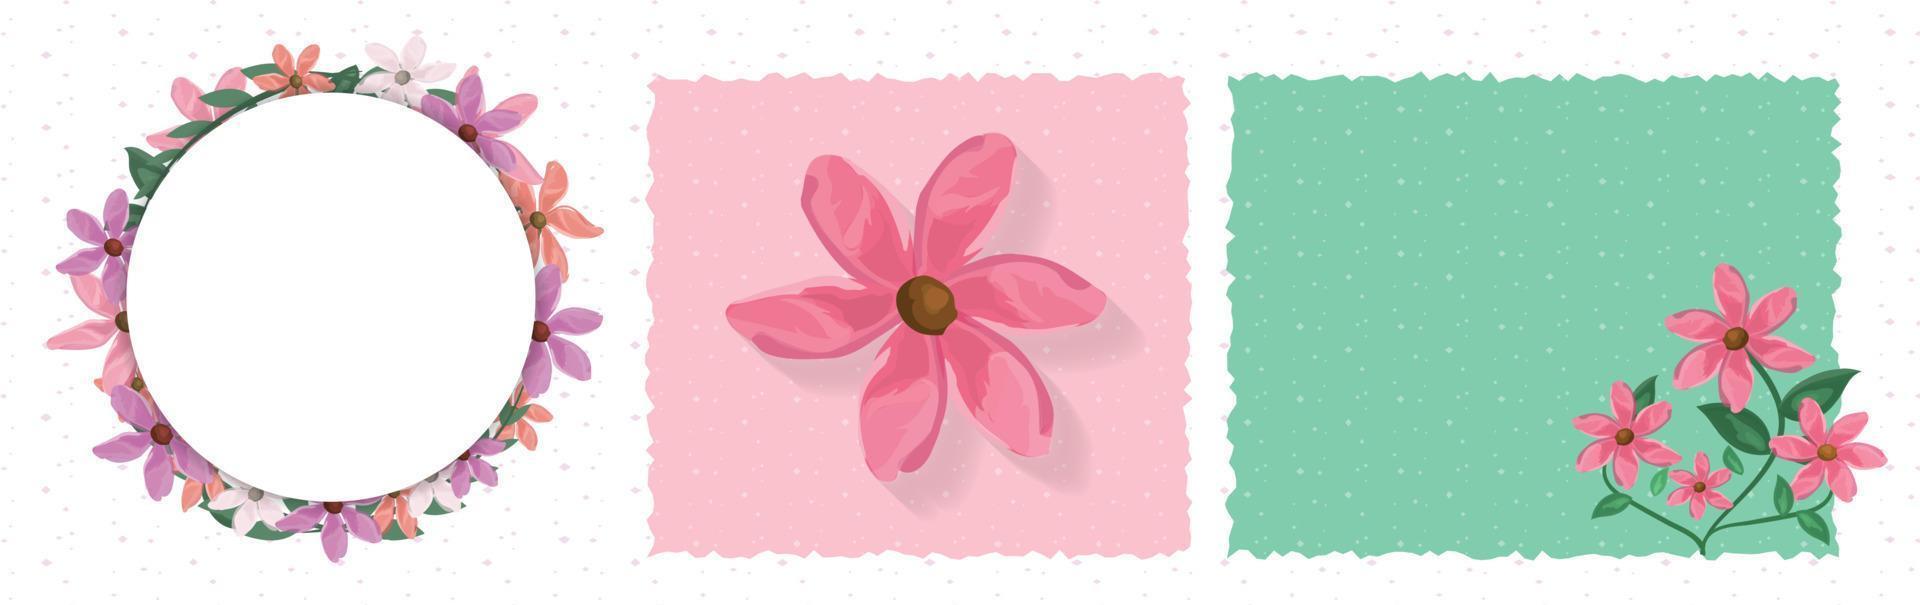 Template layout for greeting card with vector watercolor effect flowers in frame and room for text for wishes and greetings. Illustration with copy space and cute lovely floral decor